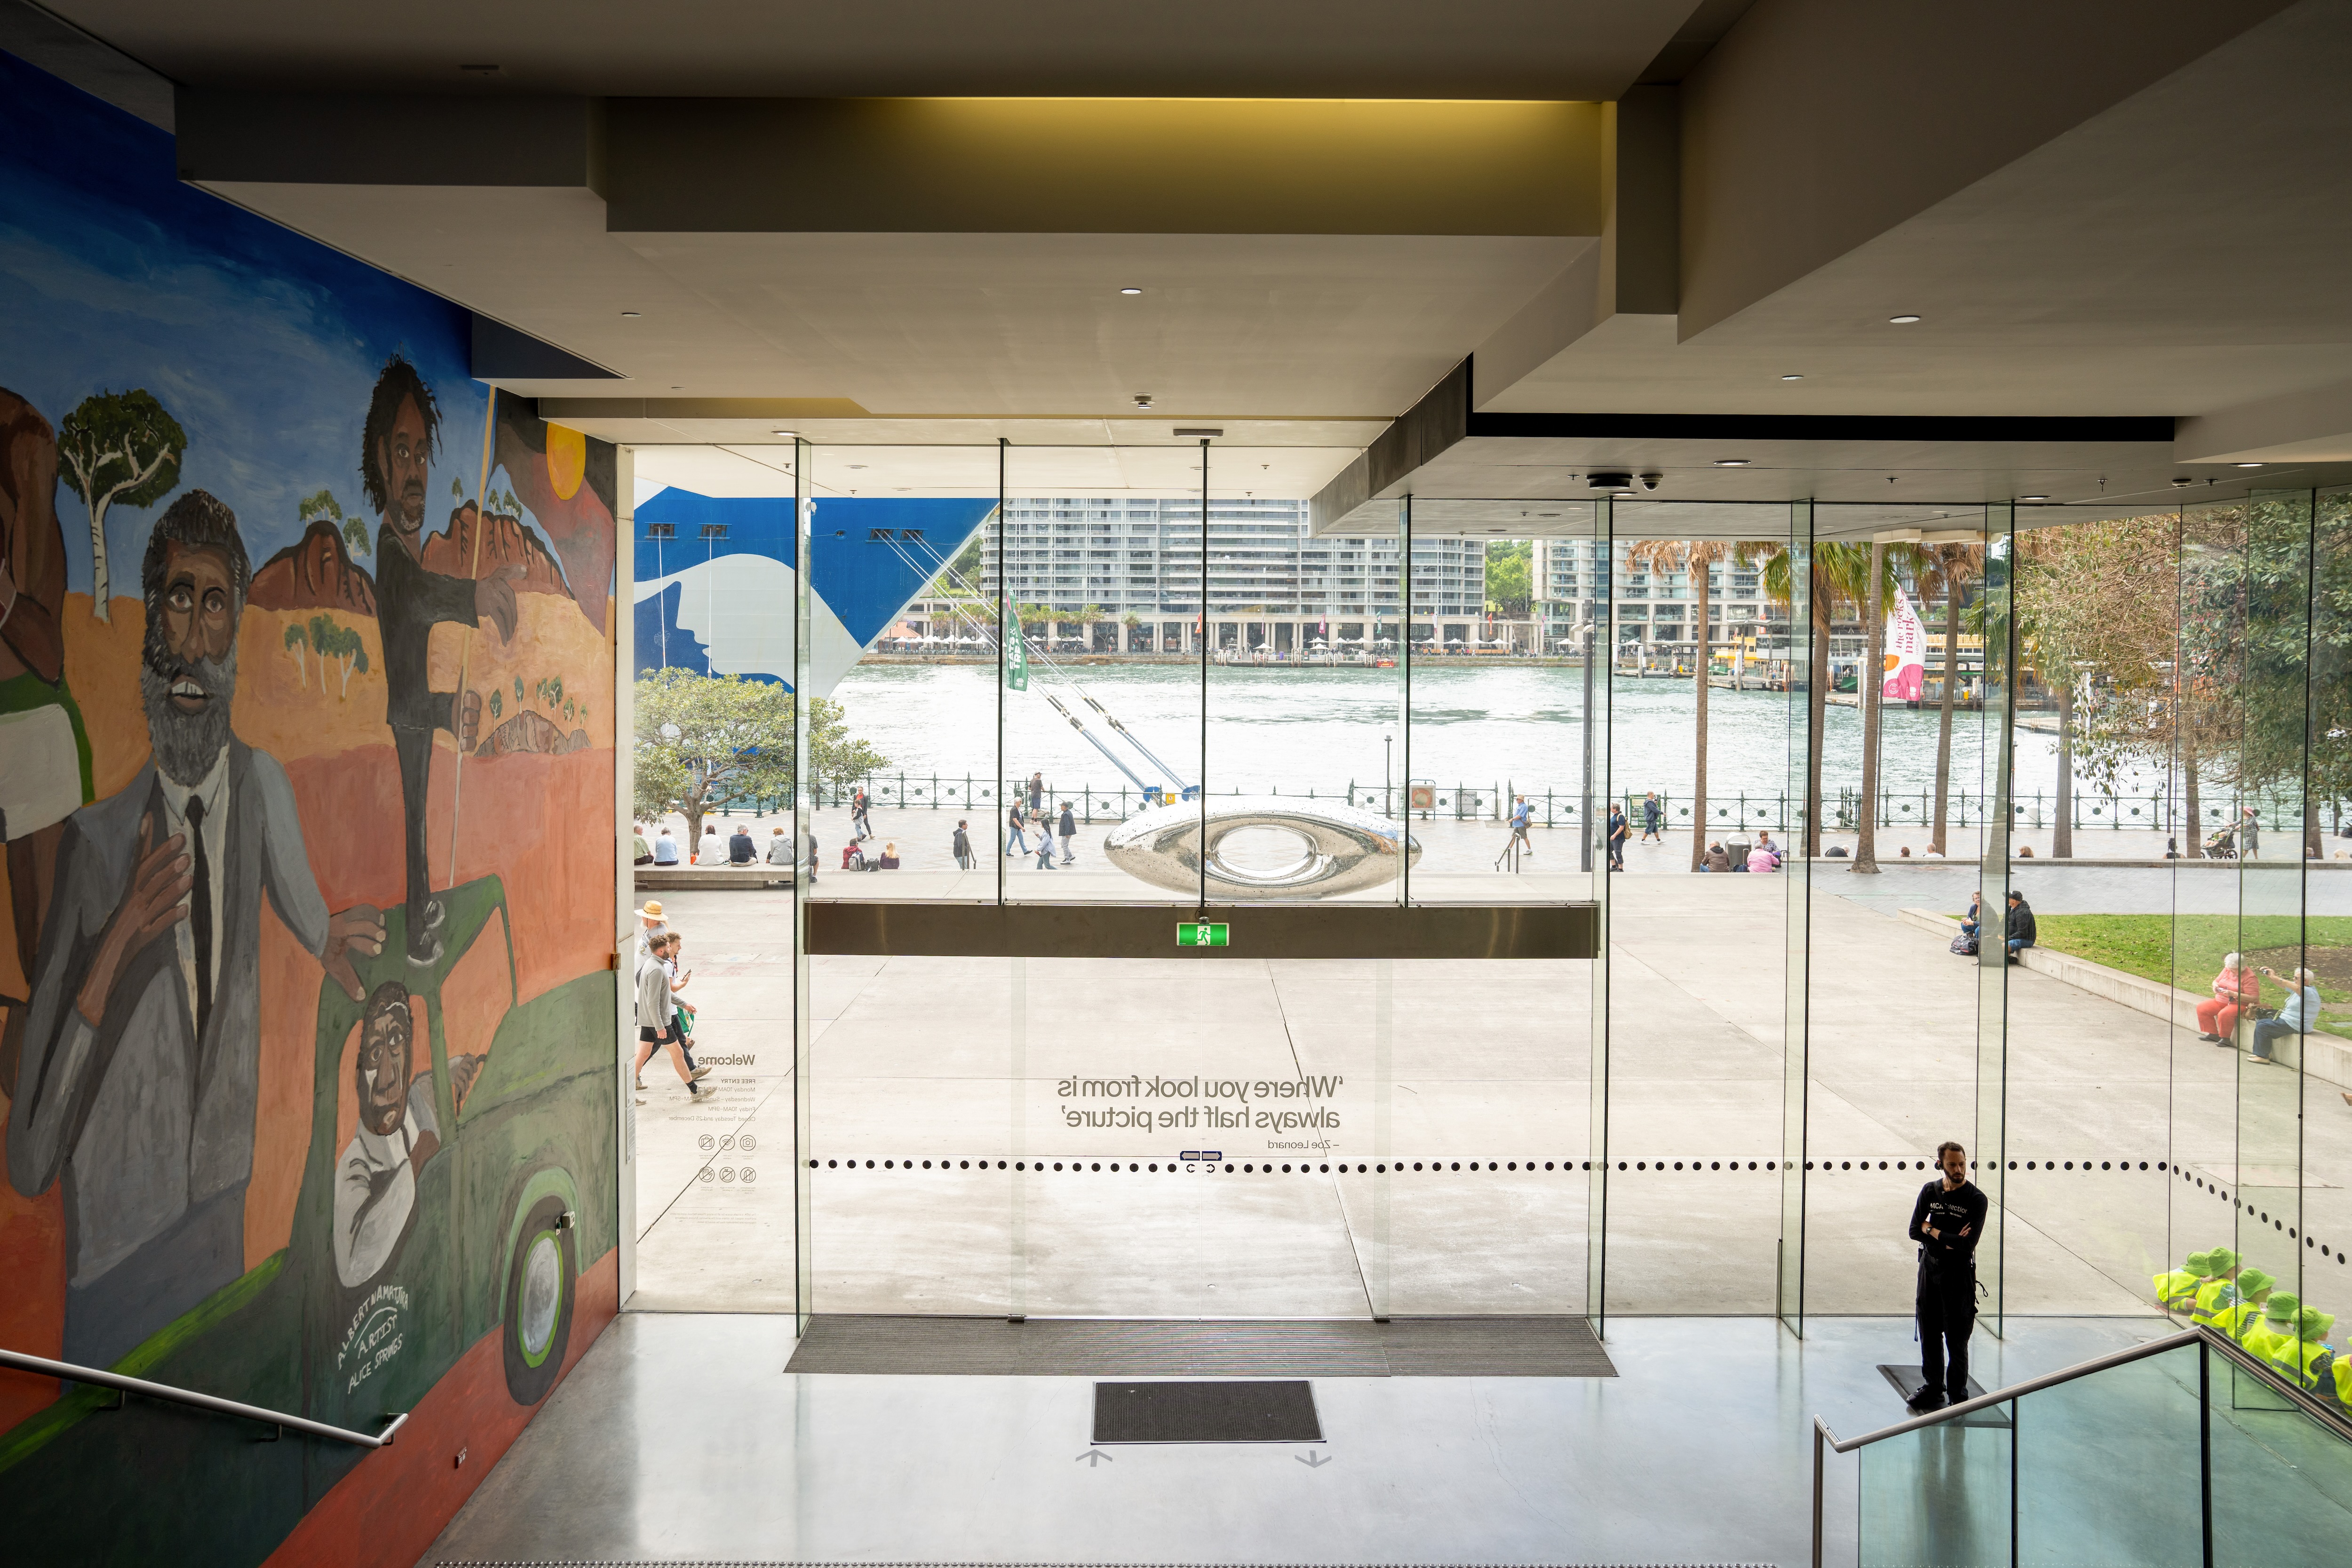 Enjoy a cultural day and let the artwork on display at the Museum of Contemporary Art of Australia inspire you